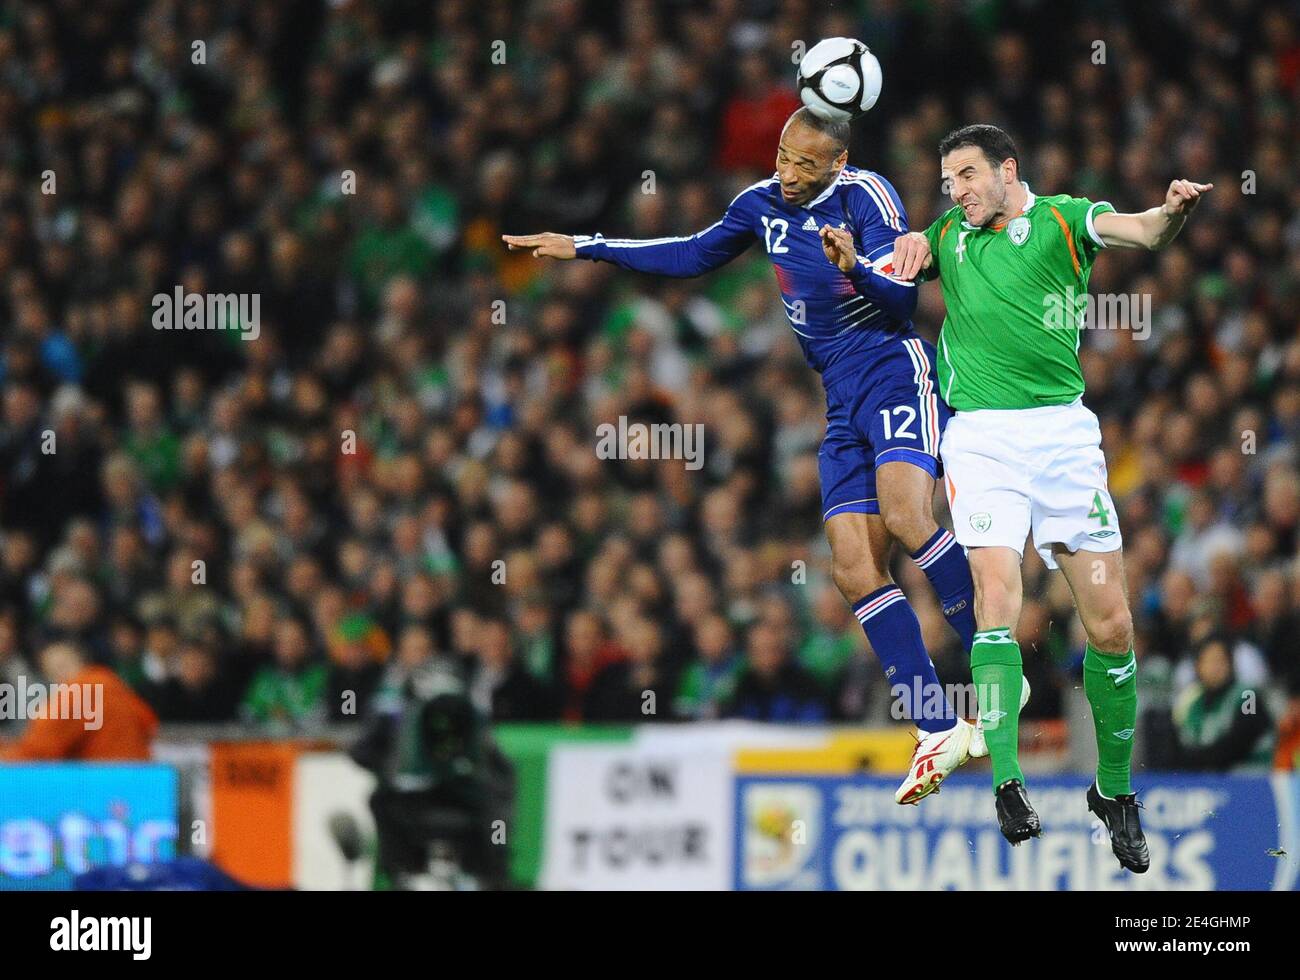 France's Thierry Henry and Ireland's John O'Shea fight for the ball in airs during the World Cup 2010 Qualifying Play off soccer match, Ireland vs France at Croke Park stadium in Dublin, Ireland on November 14, 2009. France won 1-0. Photo by Steeve McMay/ABACAPRESS.COM Stock Photo